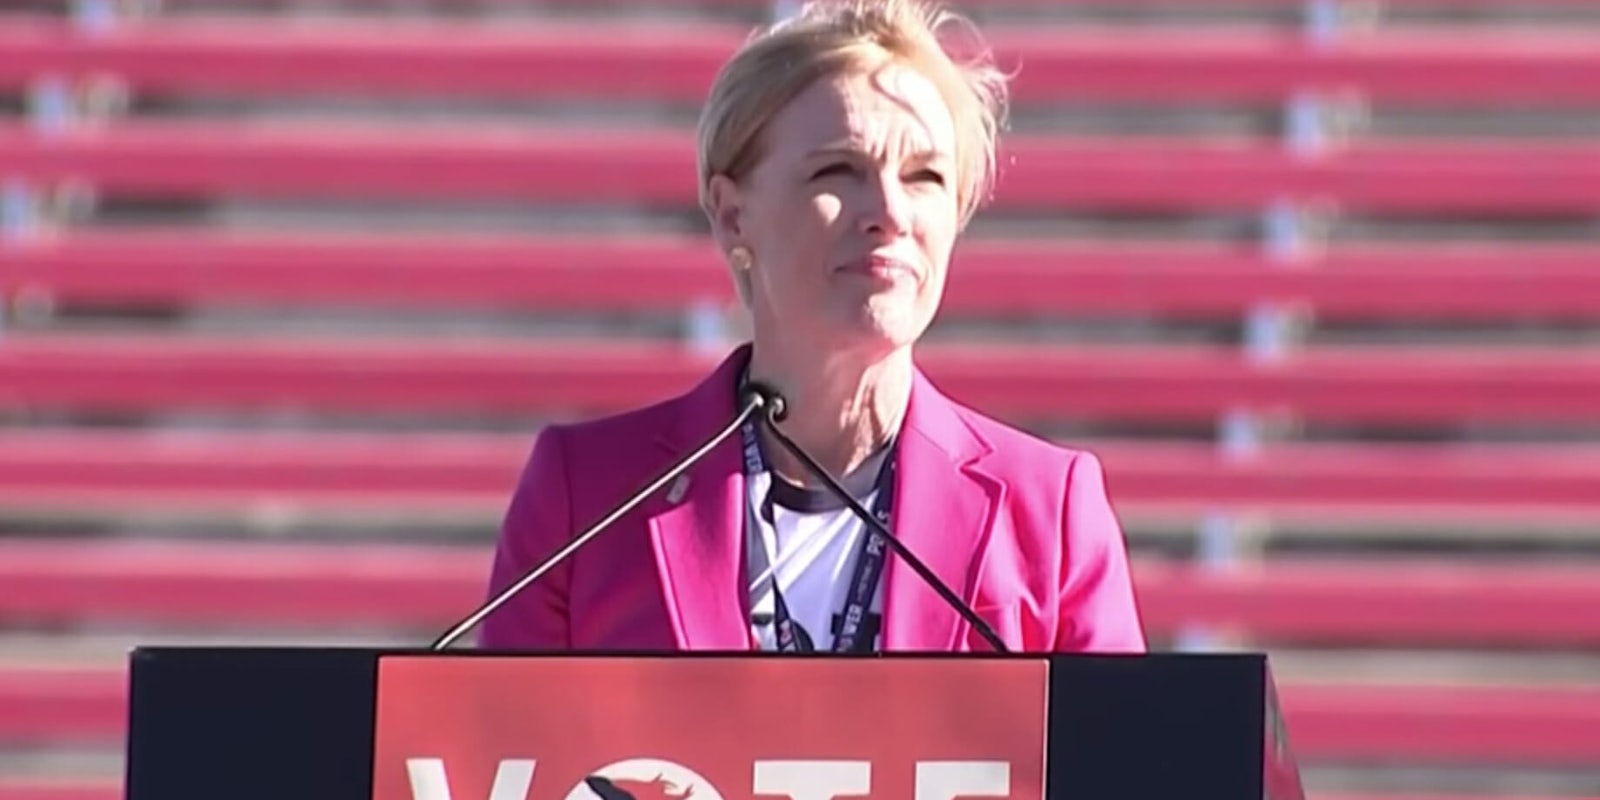 Democrats are encouraging retiring Planned Parenthood president Cecile Richards to run for political office.